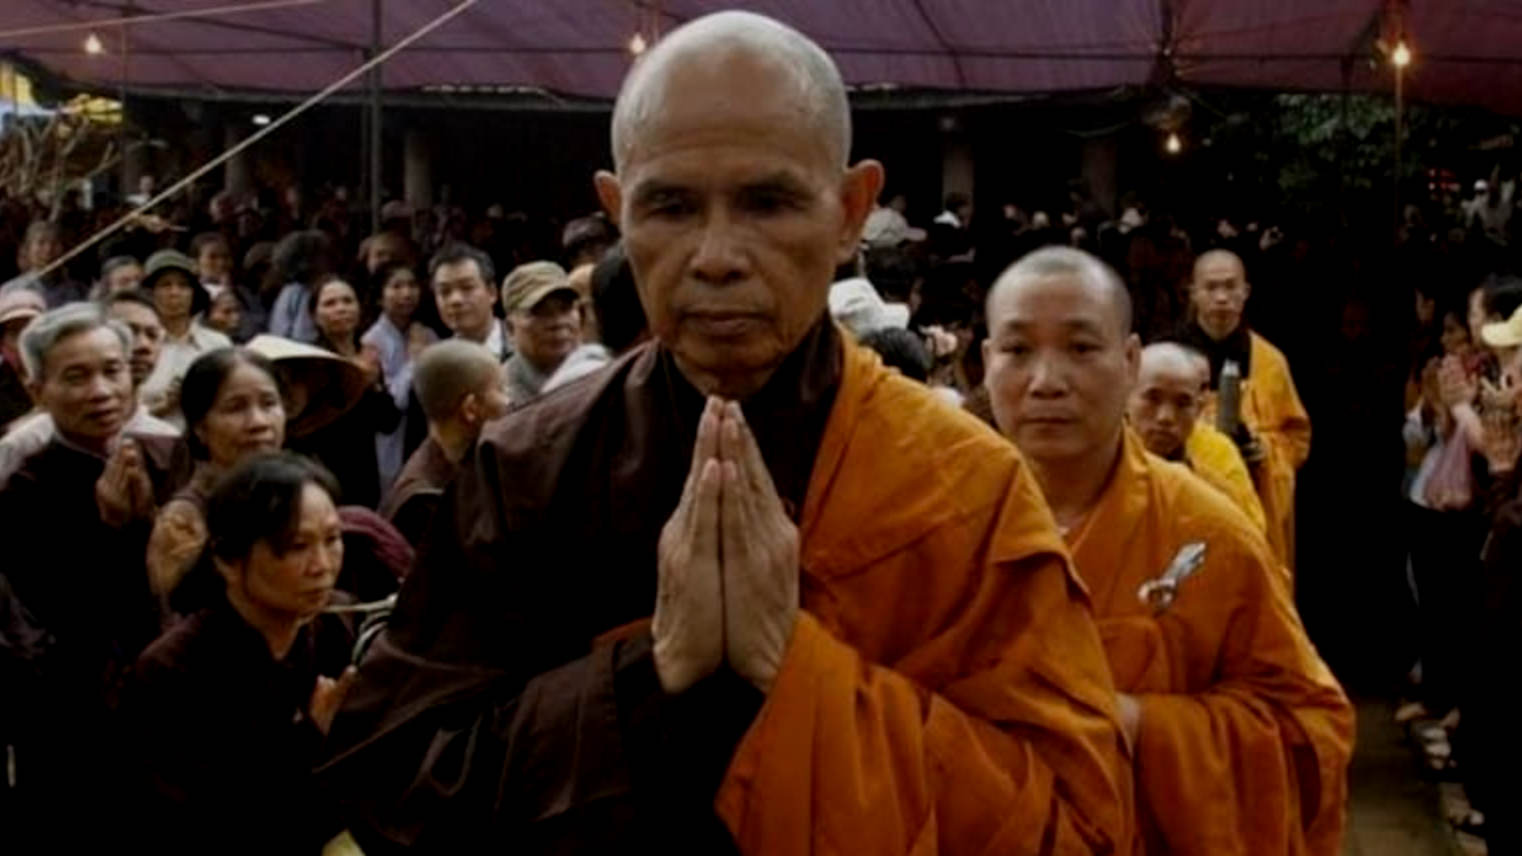 Zen Buddhist monk and peace activist Thich Nhat Hanh gained prominence in the 1960s as a major opponent of the Vietnam War